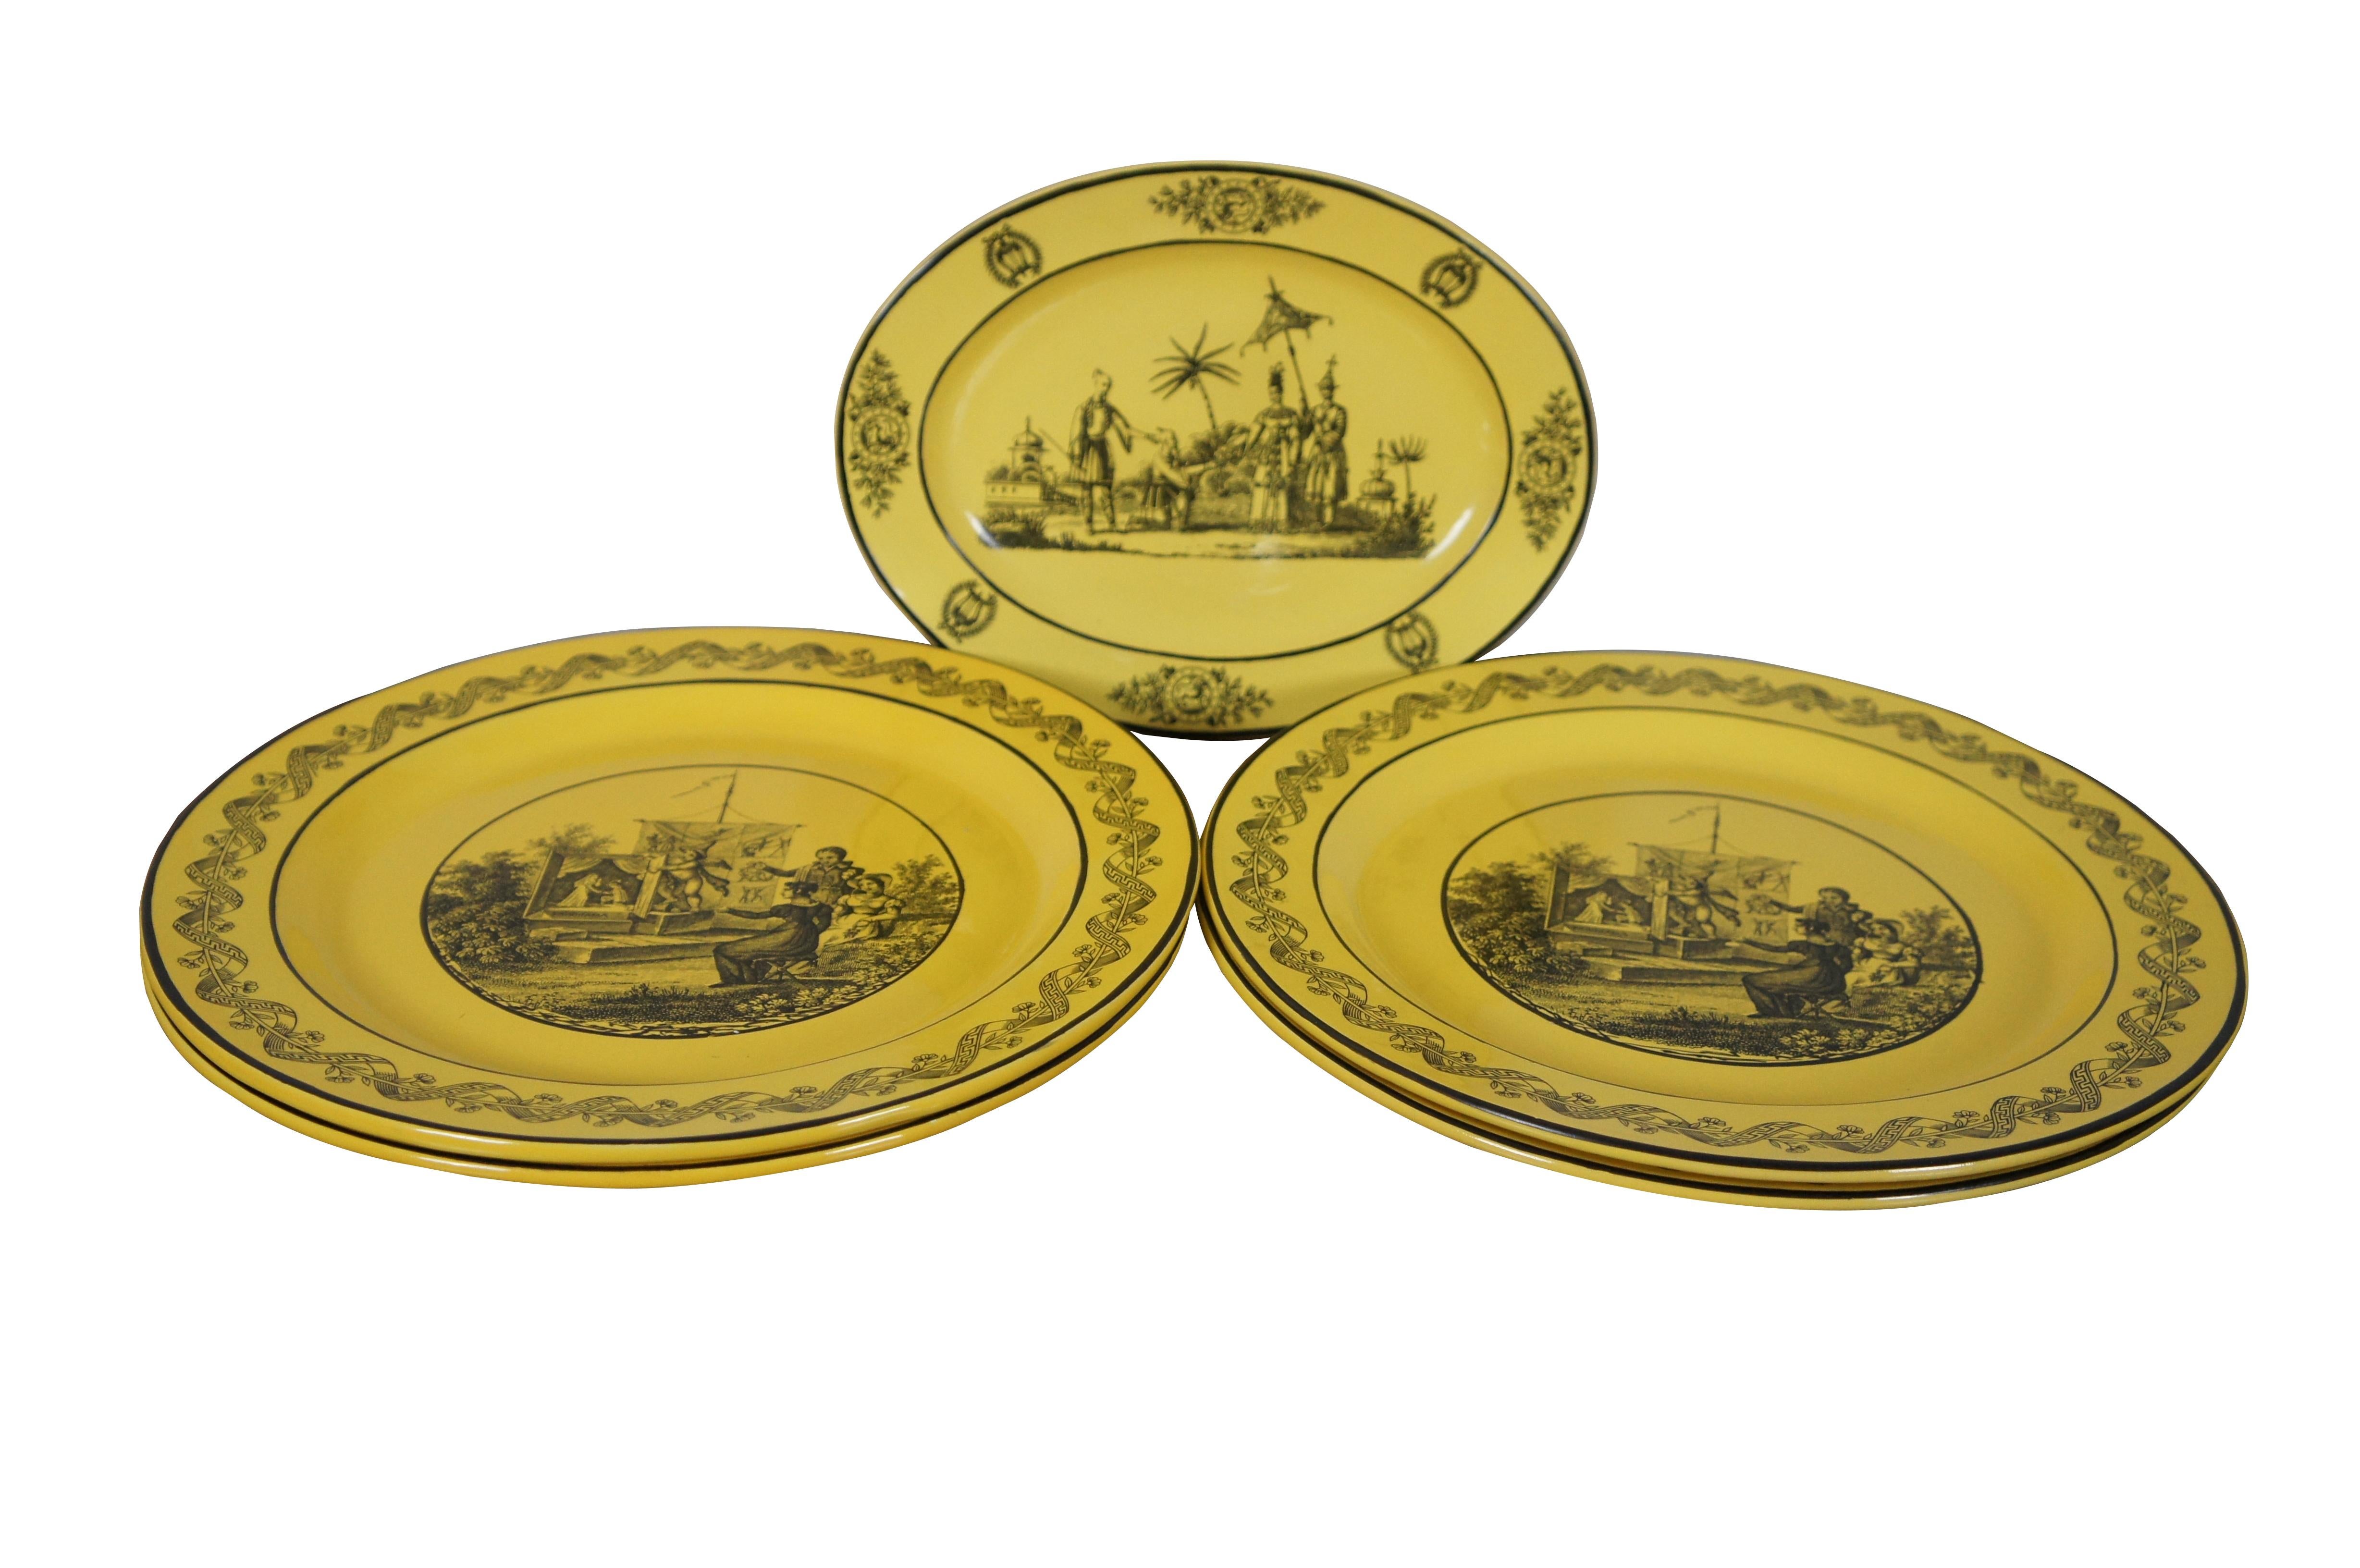 Set of four dinner plates and one oval dish in the early 19th century Criel style – mustard yellow grounds with black transferware scenes. The dinner plates show Regency era figures watching a cherub perform a puppet show in a garden. The oval dish